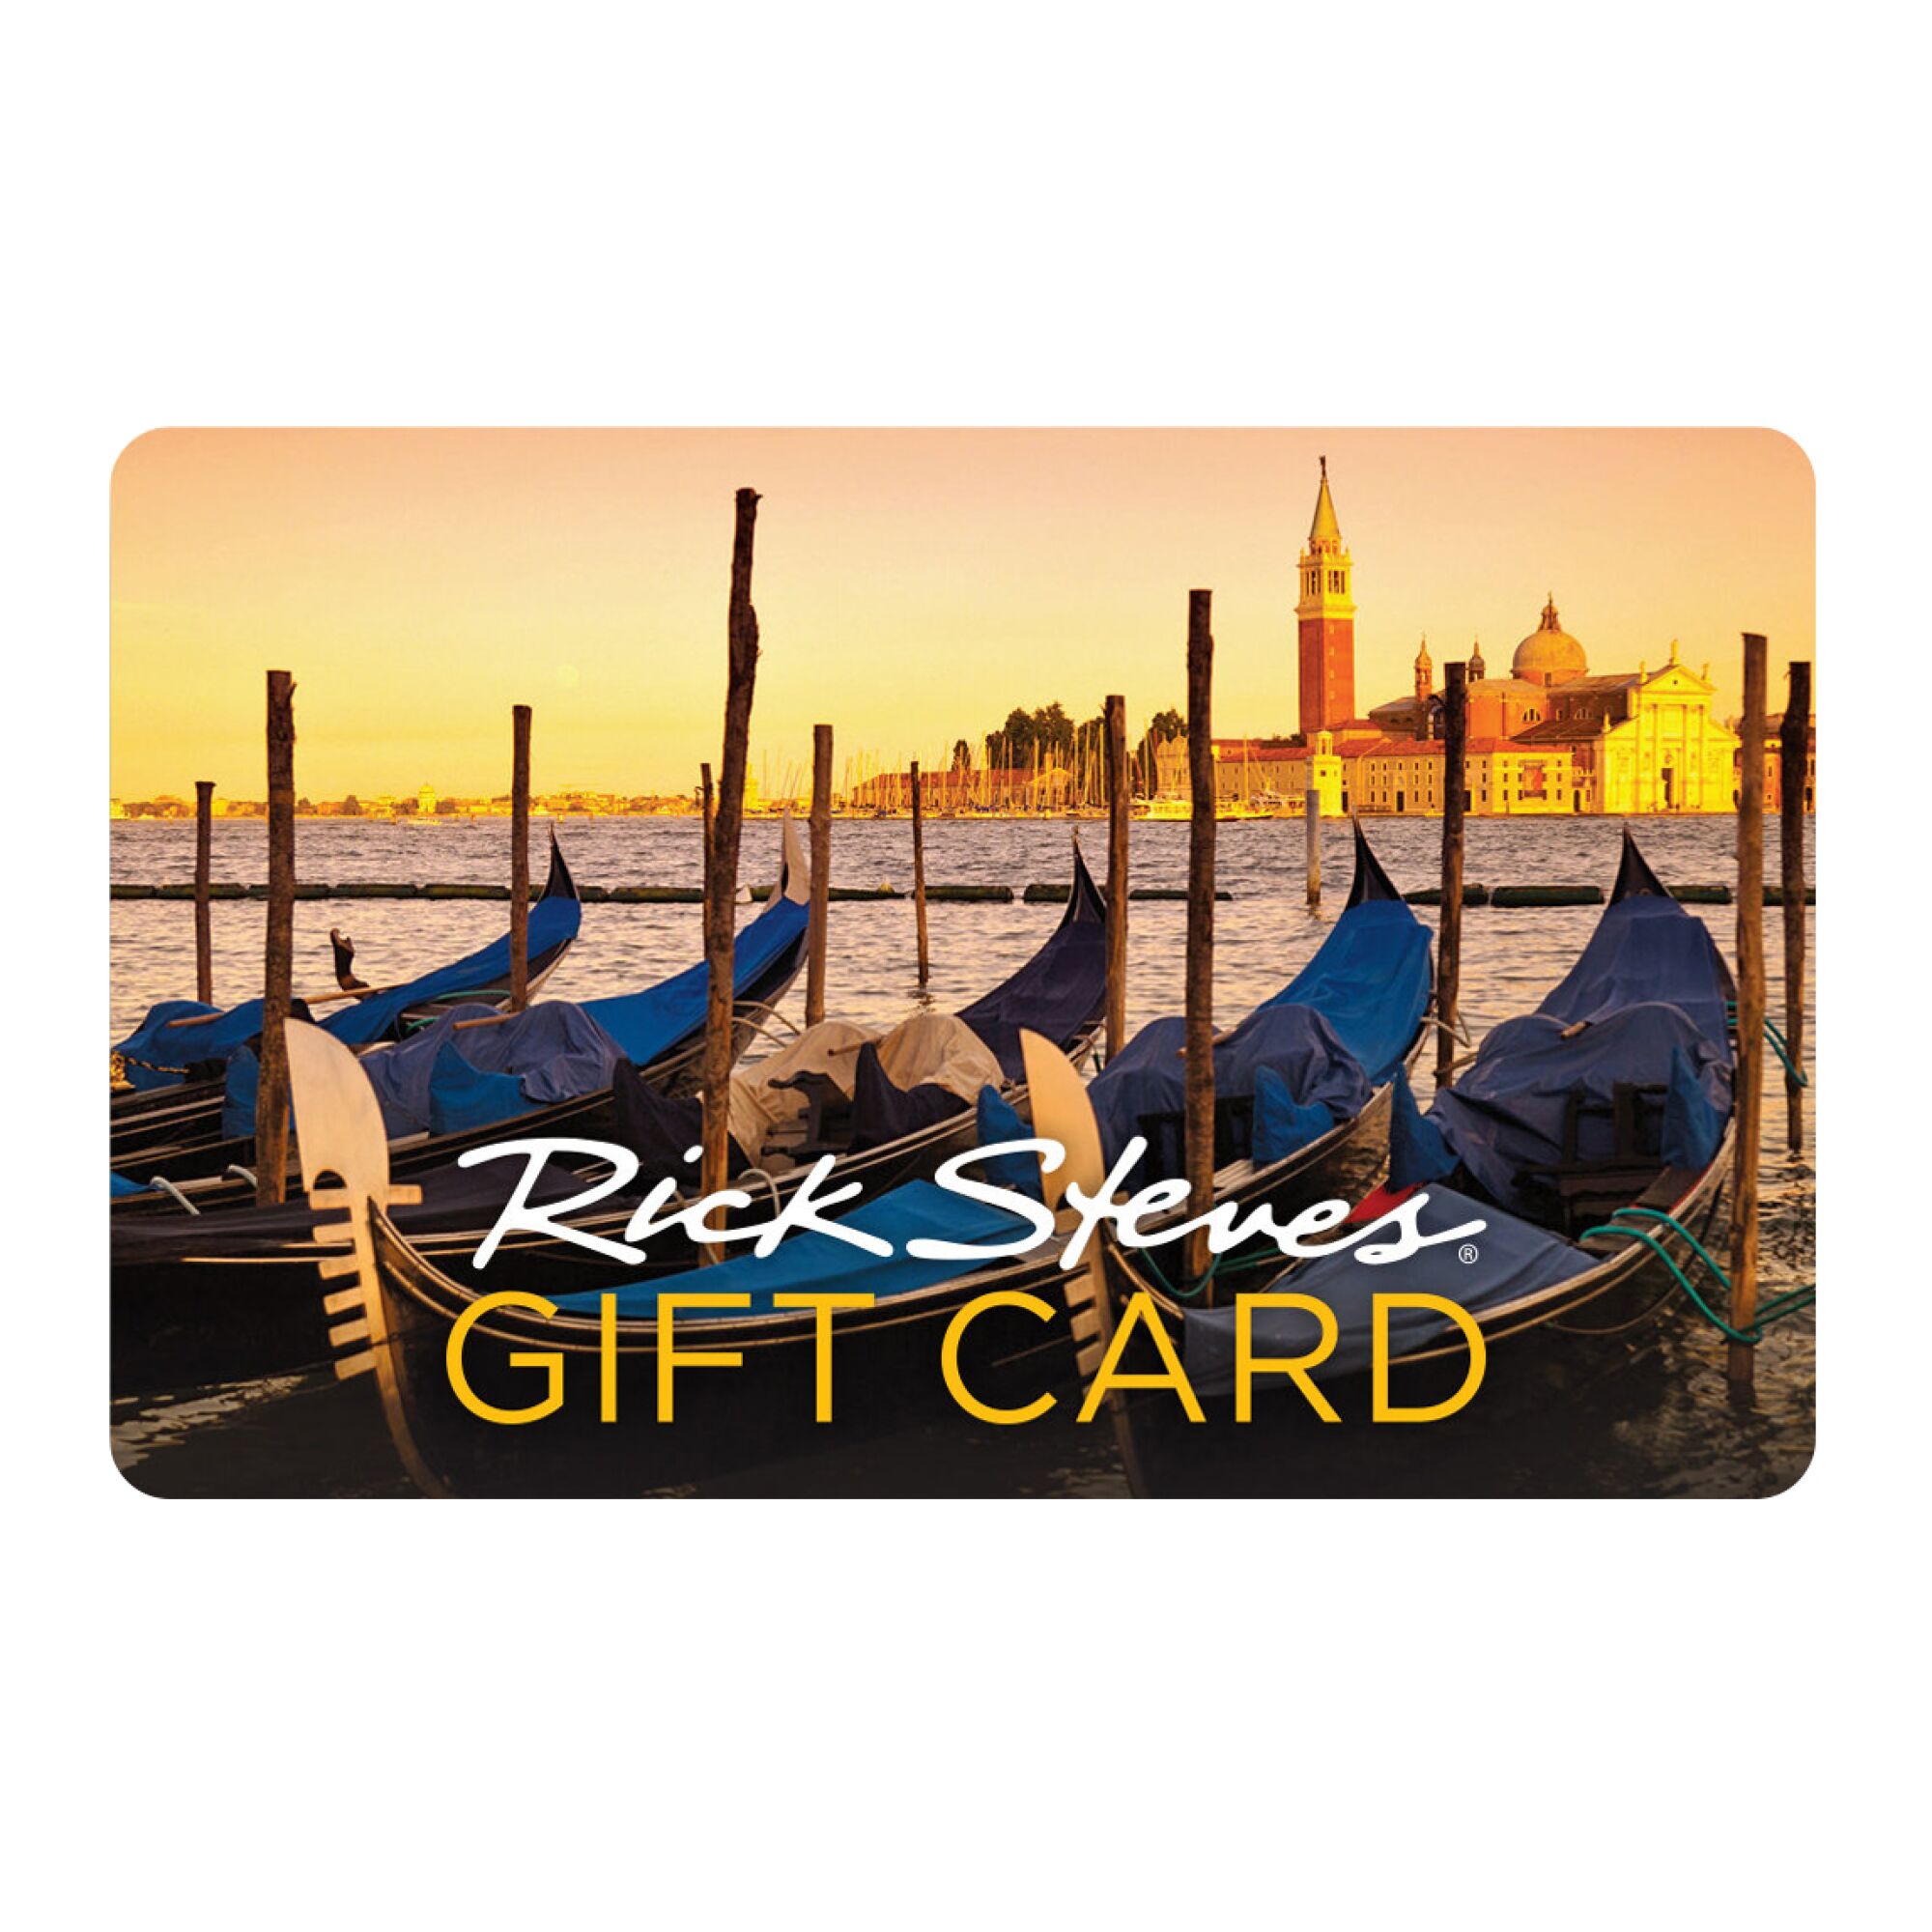 A gift card to Rick Steves Europe